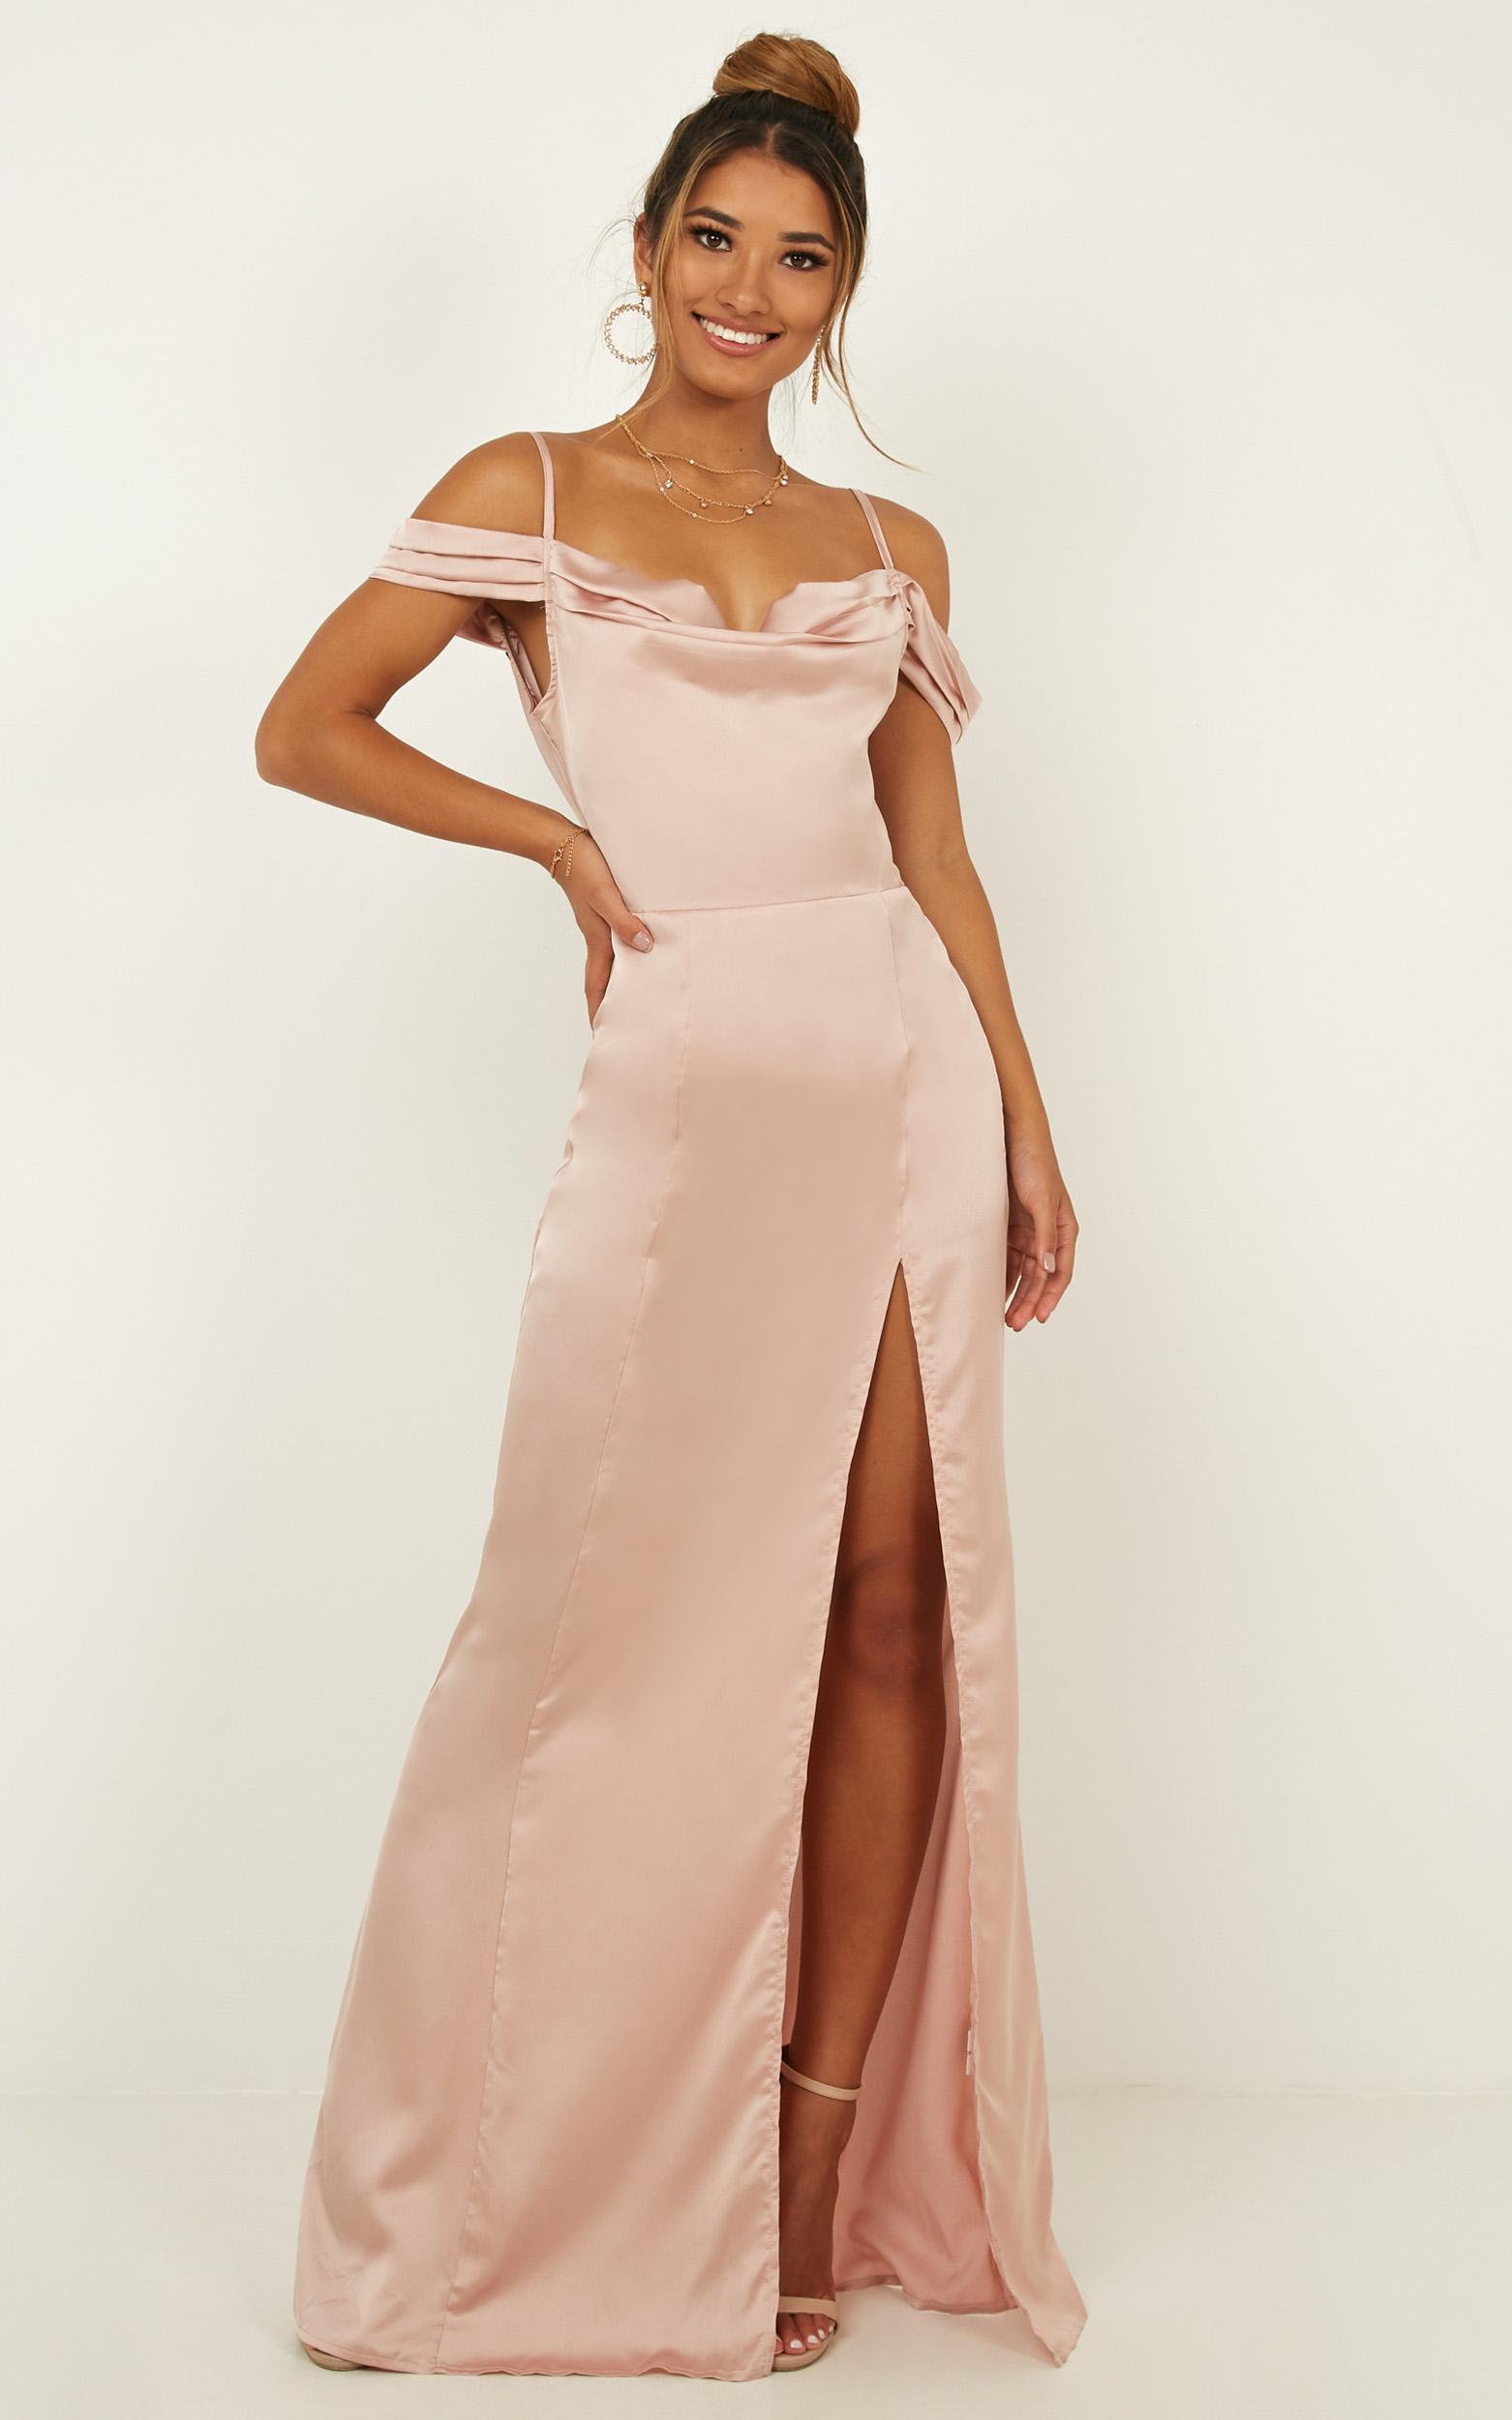 City Is Mine Dress in blush satin - 6 (XS), Blush, hi-res image number null